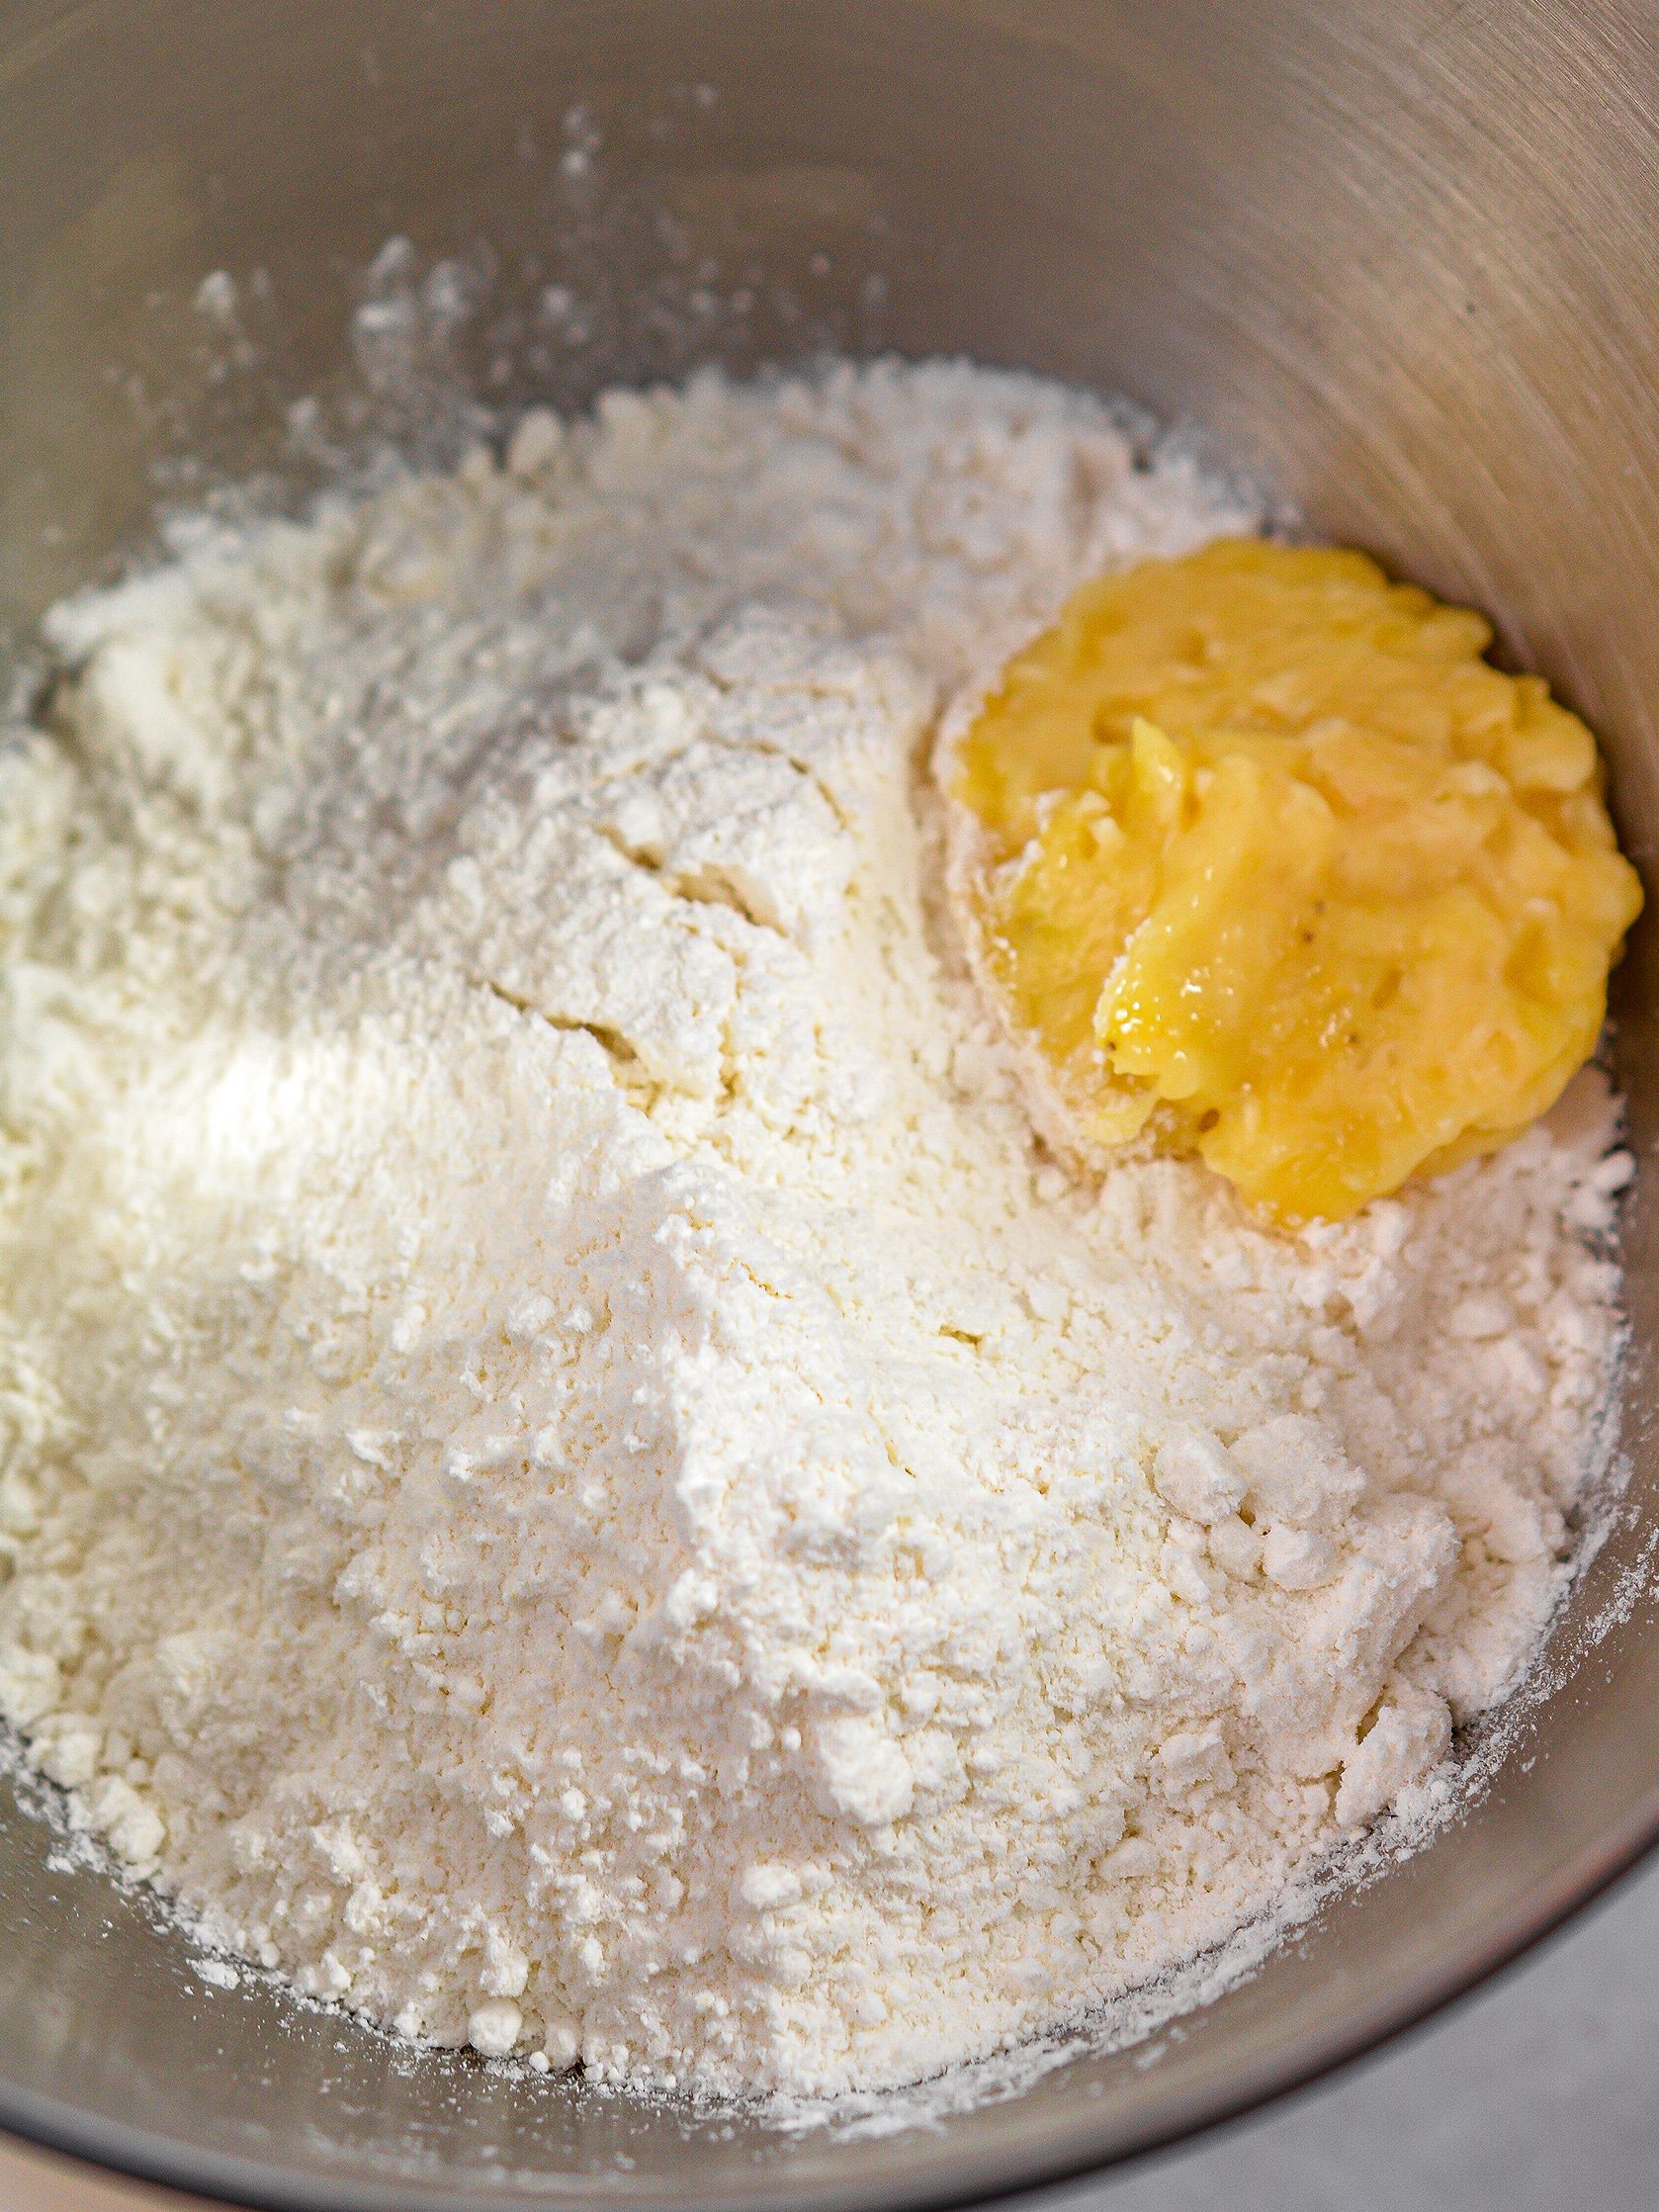  In a mixing bowl, blend the white cake mix according to package instructions. 